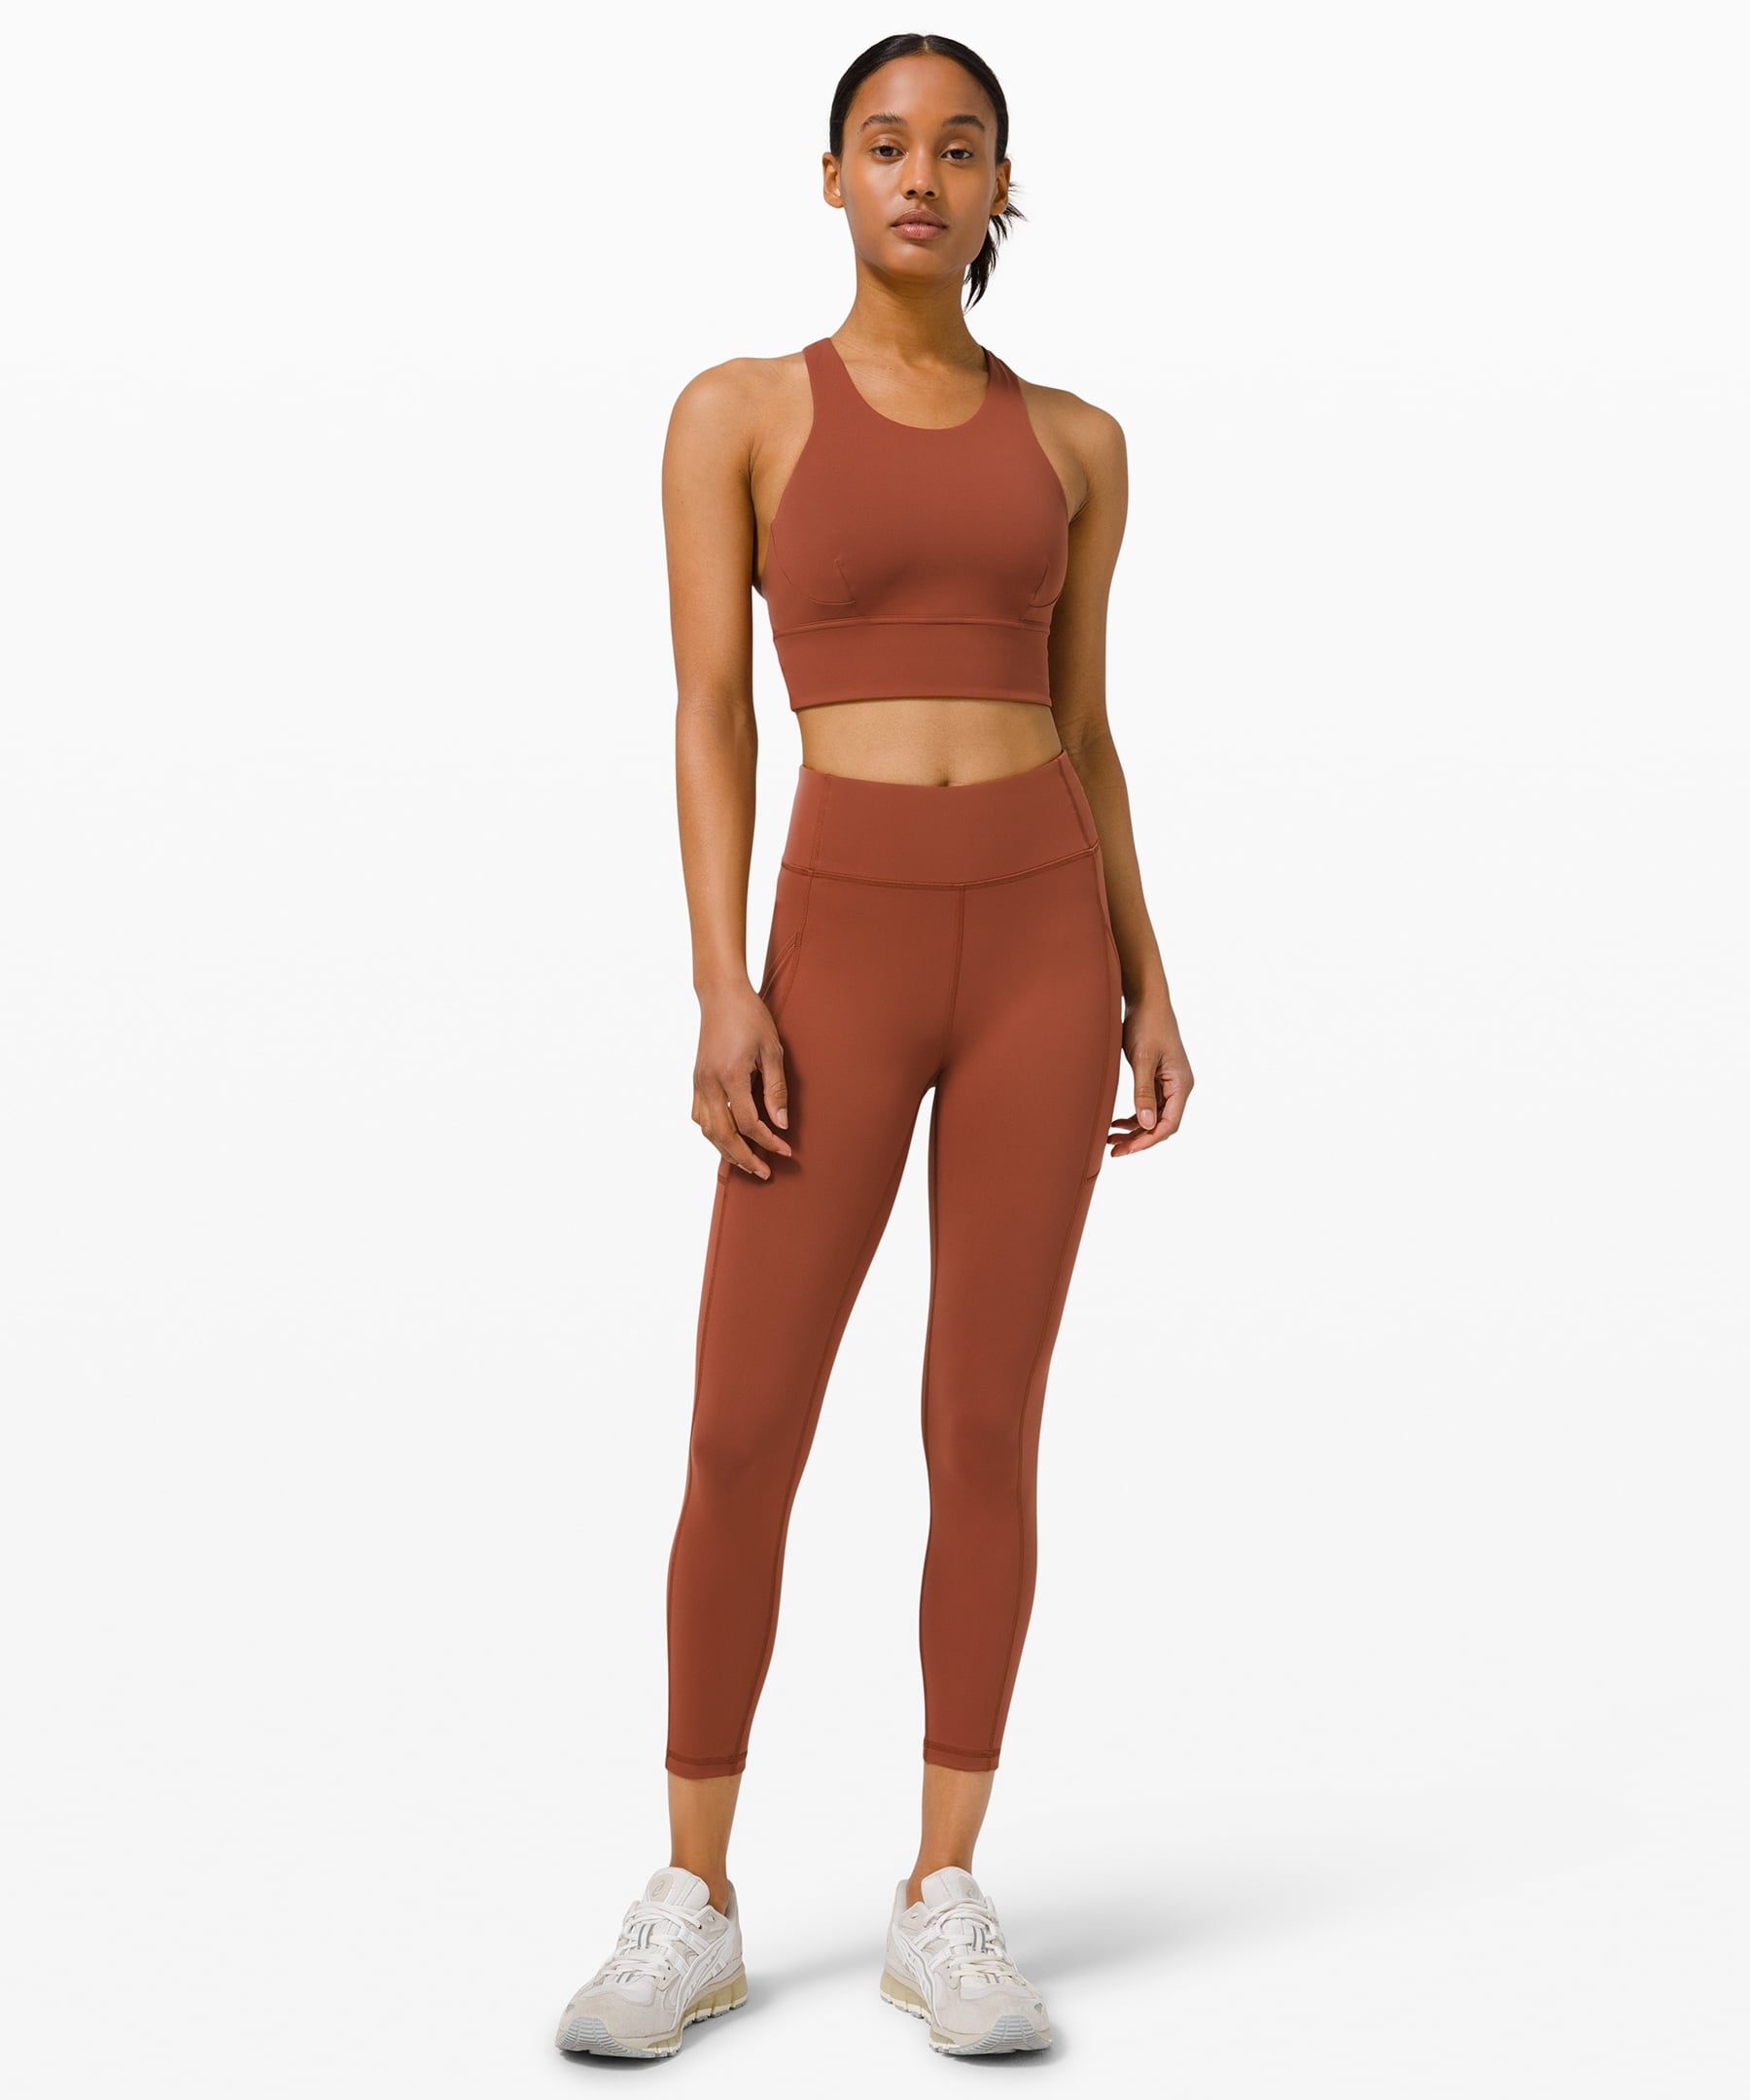 Lululemon Wunder Train Long Line Bra and Invigourate High-Rise Tight, 13  Matching Sets You Can Shop at Lululemon, Because Your Shades of Black  Should Match